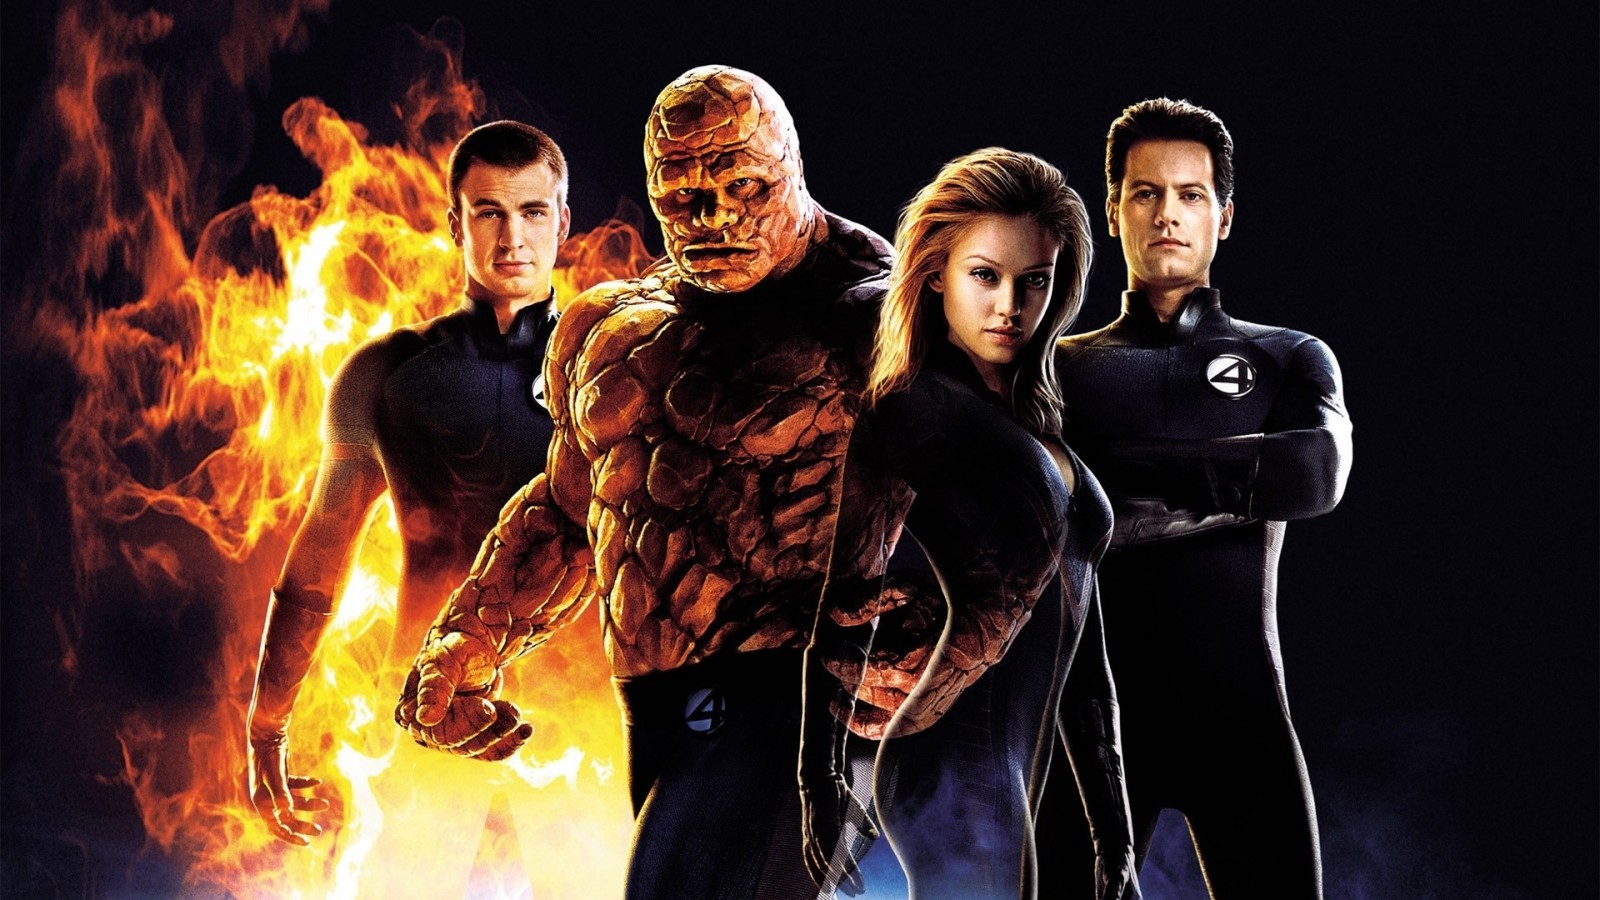 movies, Jessica Alba, Chris Evans, Human Torch, Thing, Fantastic Four, Invisible Woman, Mr Fantastic, Susan Storm, performance, stage, musical theatre, performance art, performing arts High quality walls